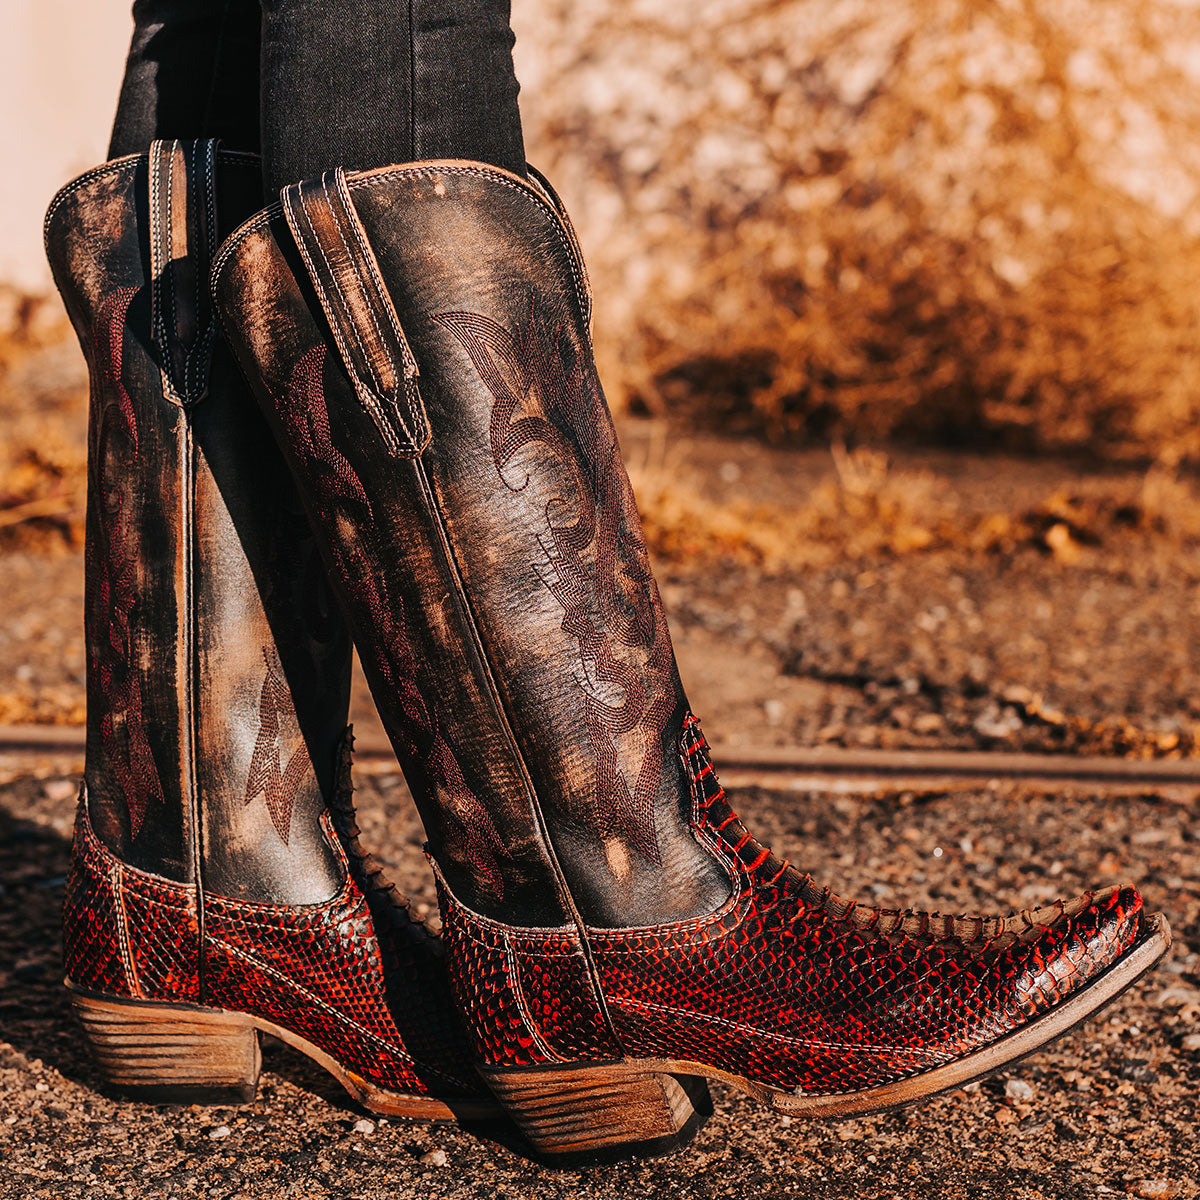 FREEBIRD women's Woodland wine python multi leather cowboy boot with stitch detailing and snip toe construction